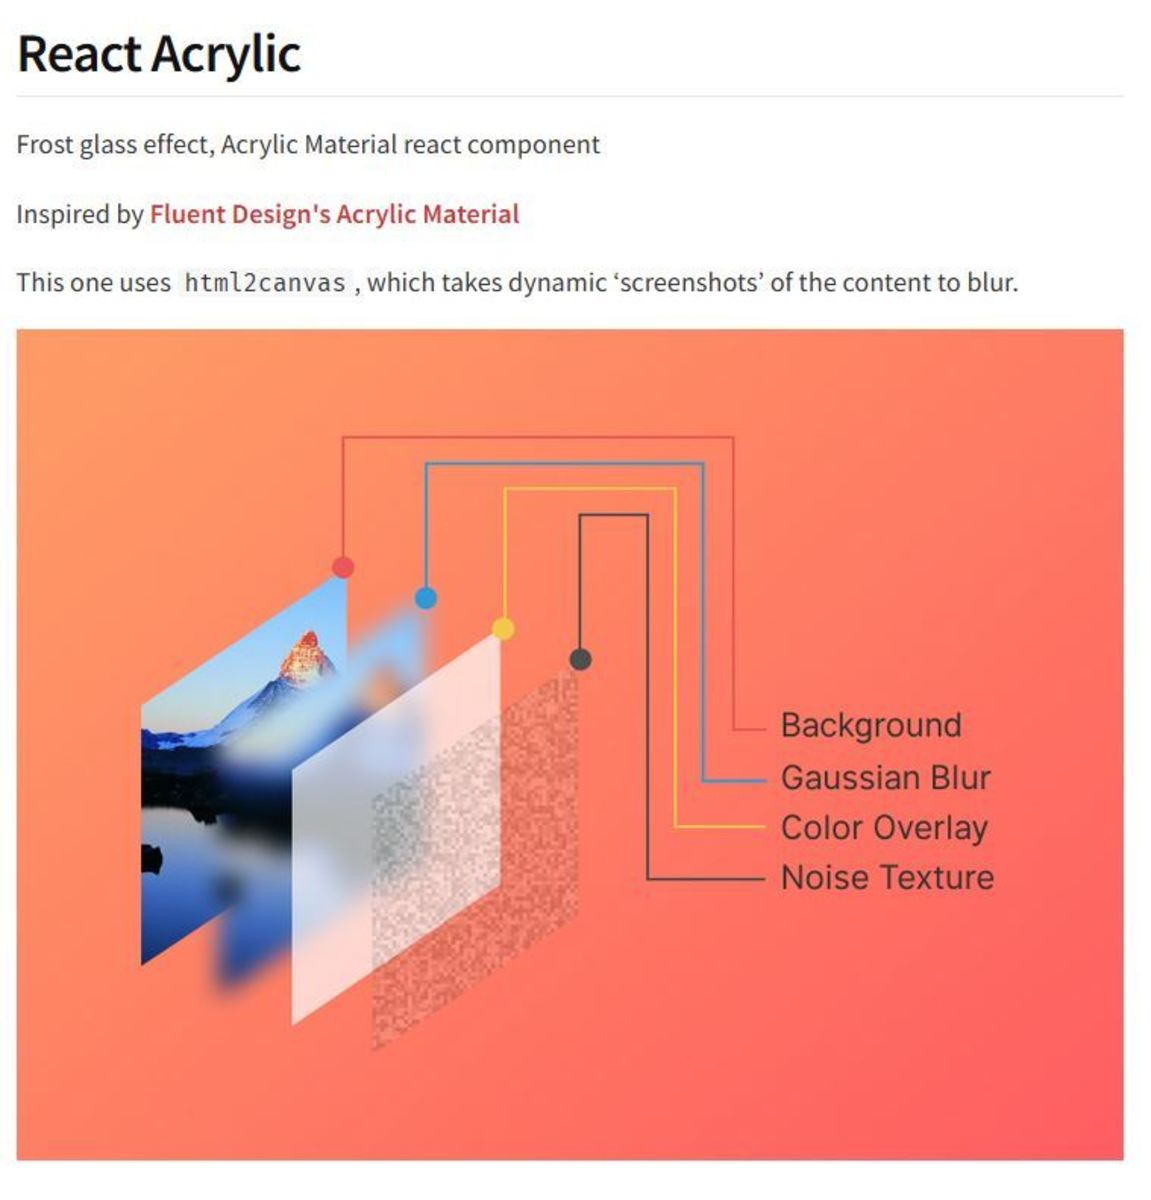 React Acrylic is a library for creating frosted glass effects.